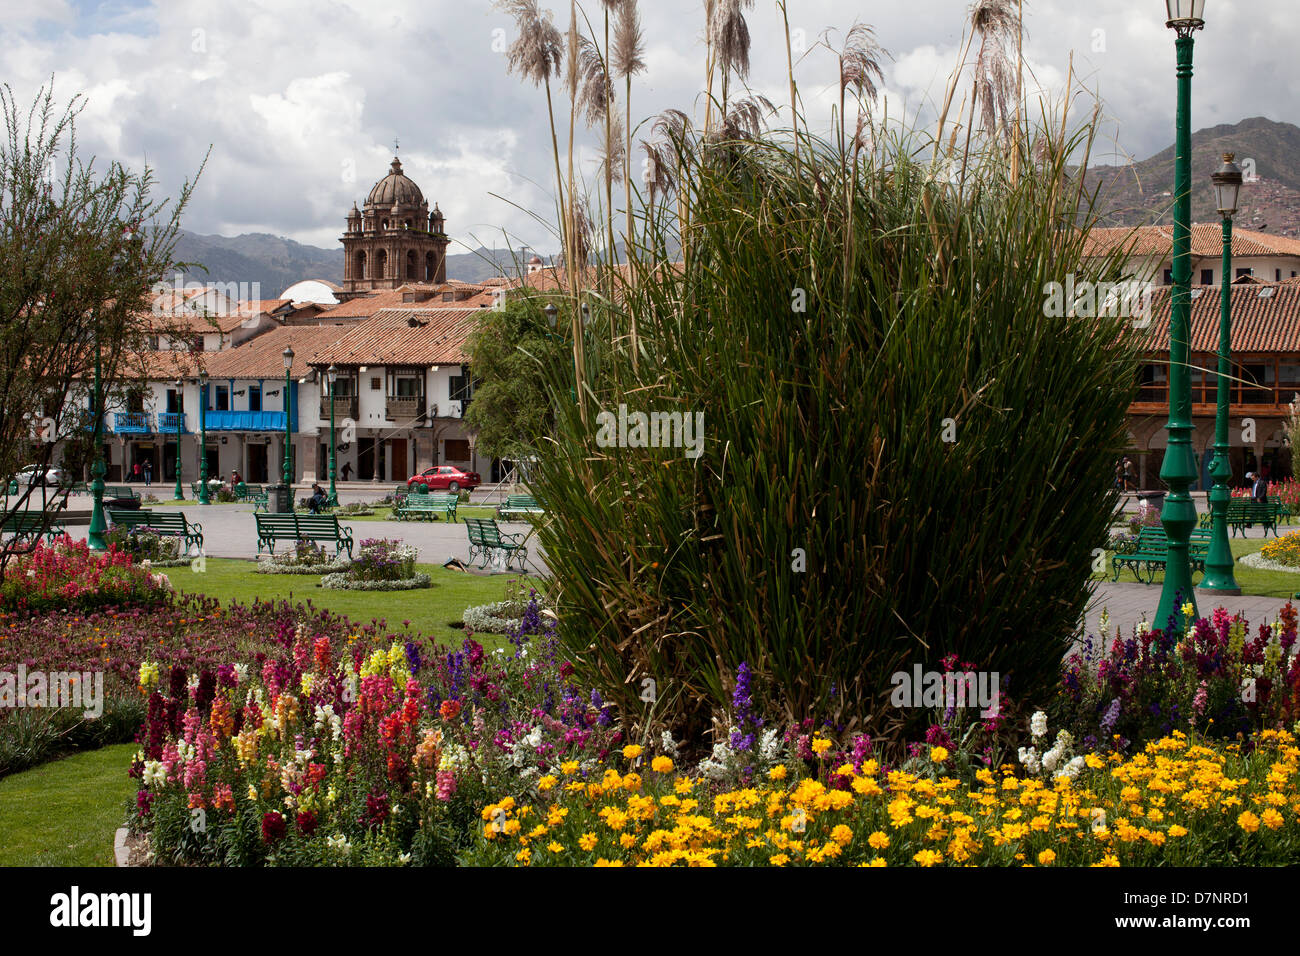 View of the main square in Cuzco Stock Photo